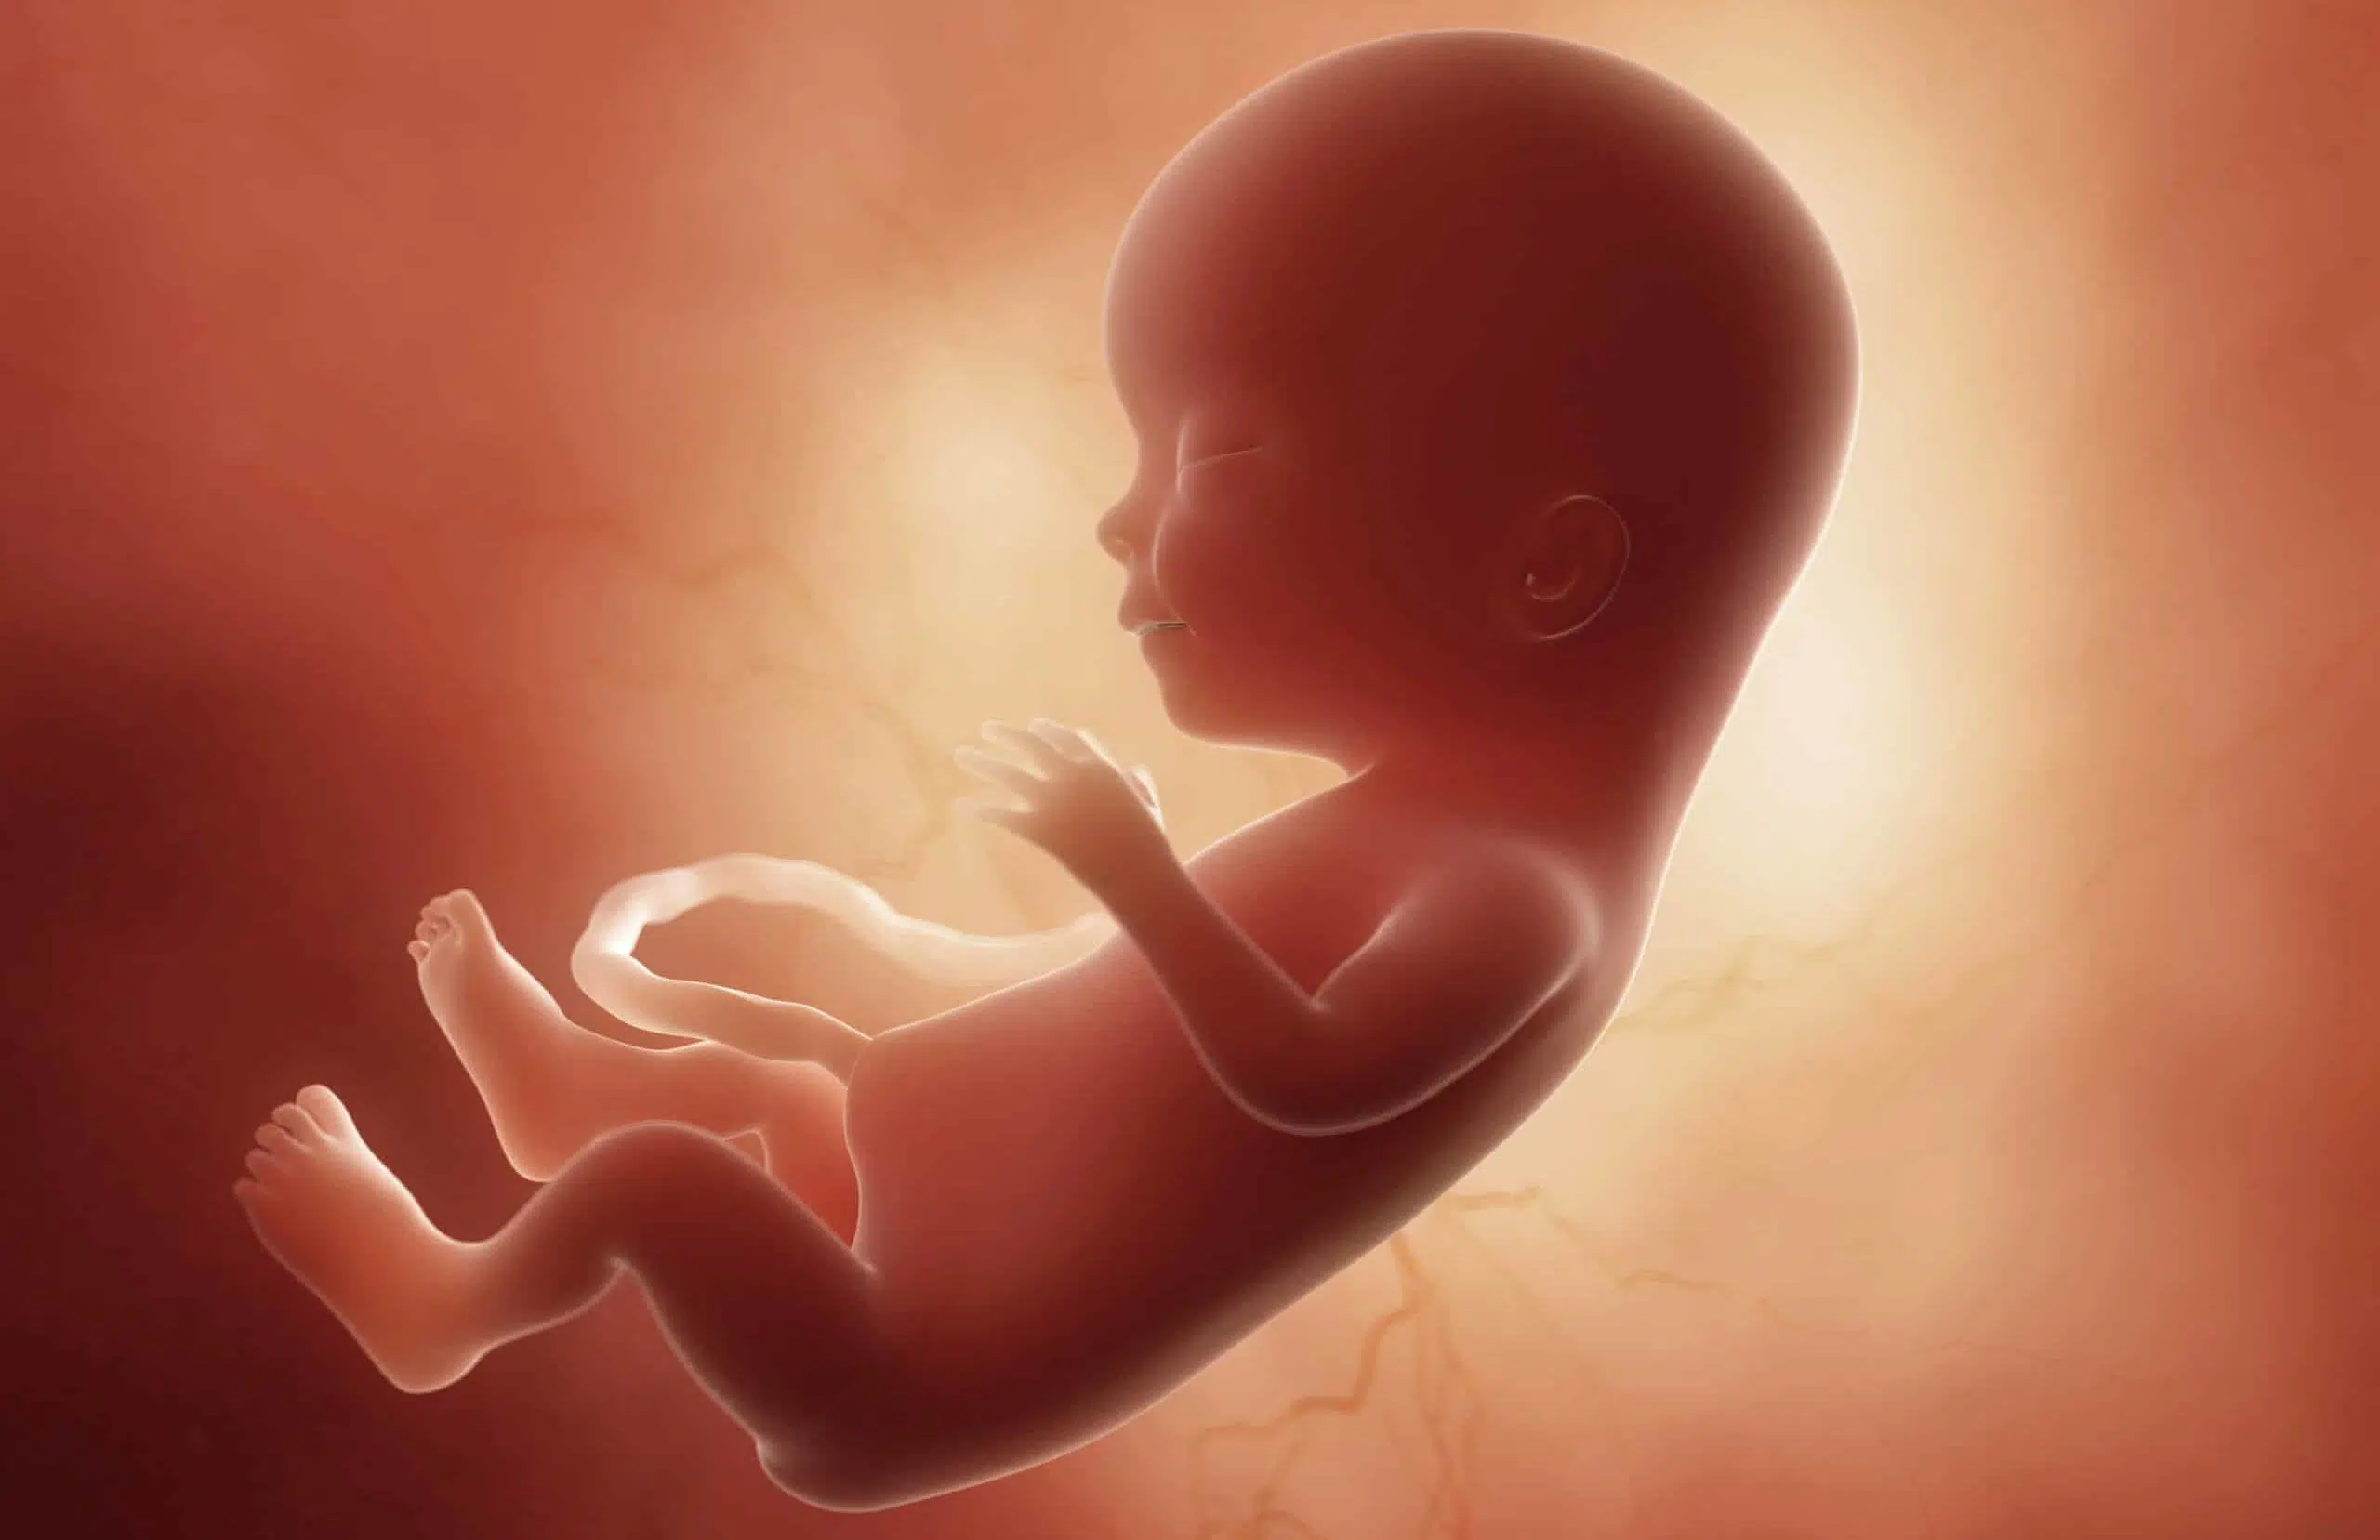 fetus, 3d rendered medically accurate